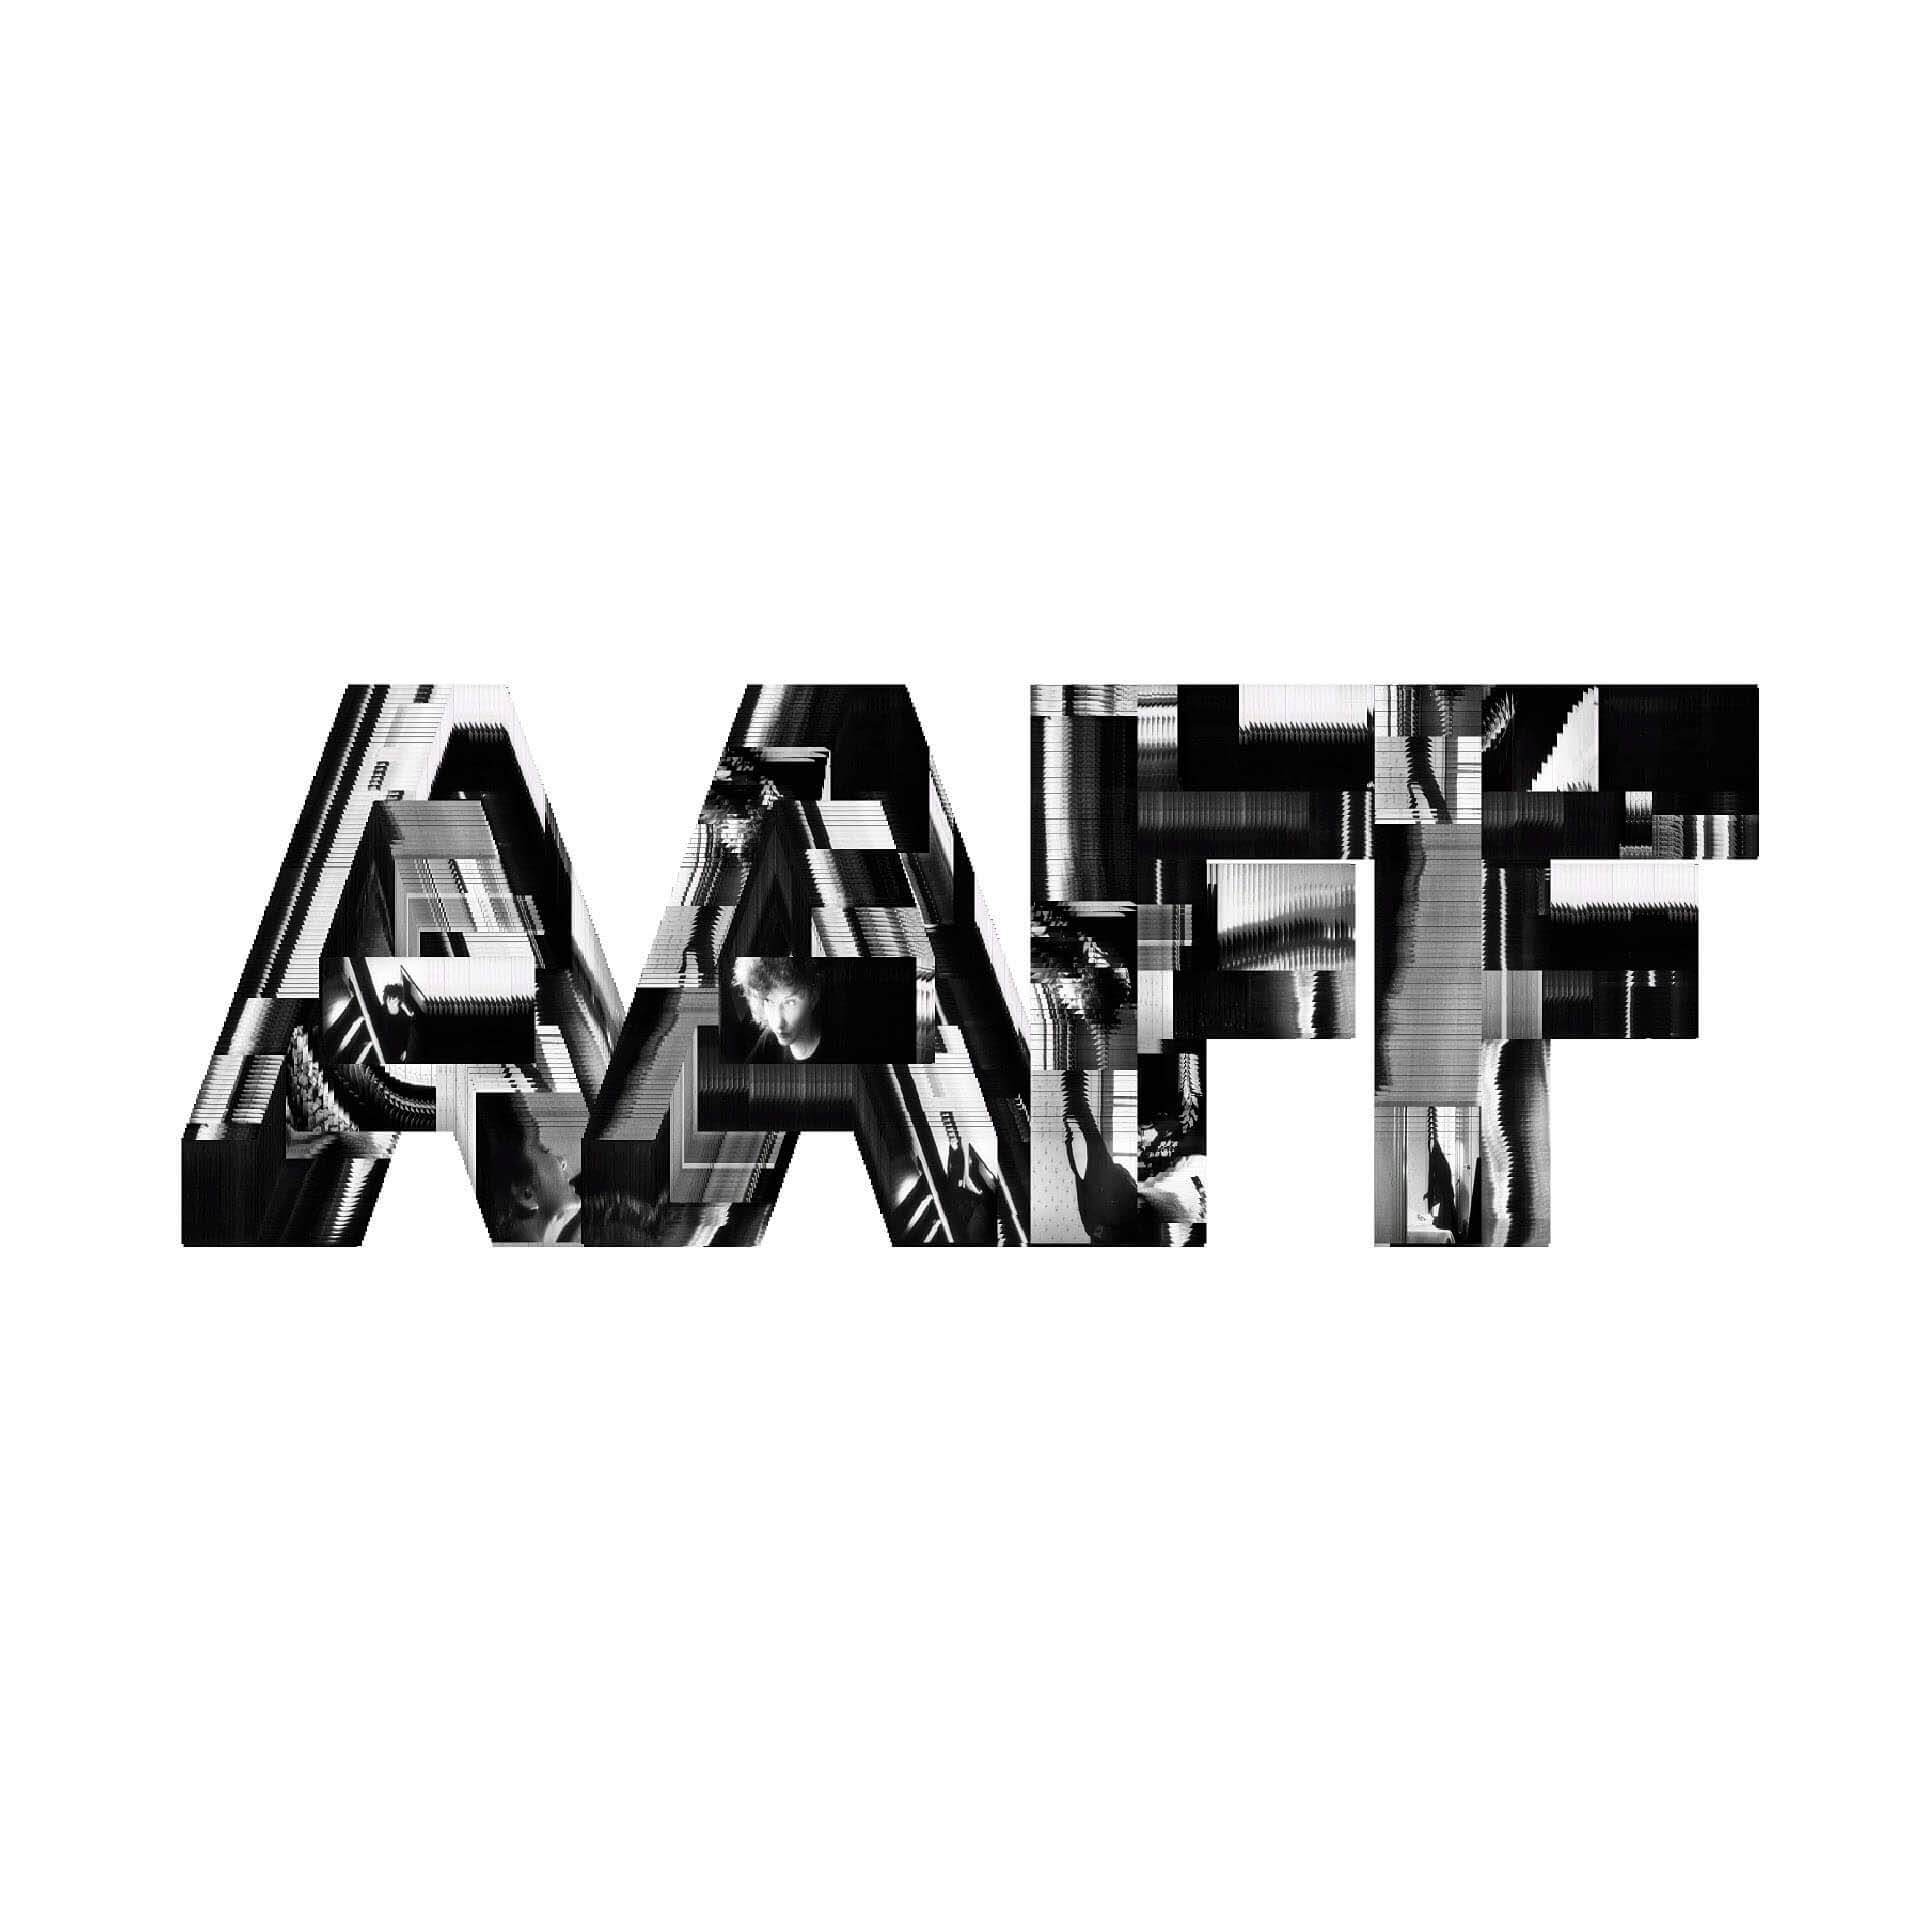 Kinetic Type Tool for the 59th Ann Arbor Film Festival. Image of the acronym "AAFF" written in bold black lettering against a white background. Abstract images create the shapes of the letters.